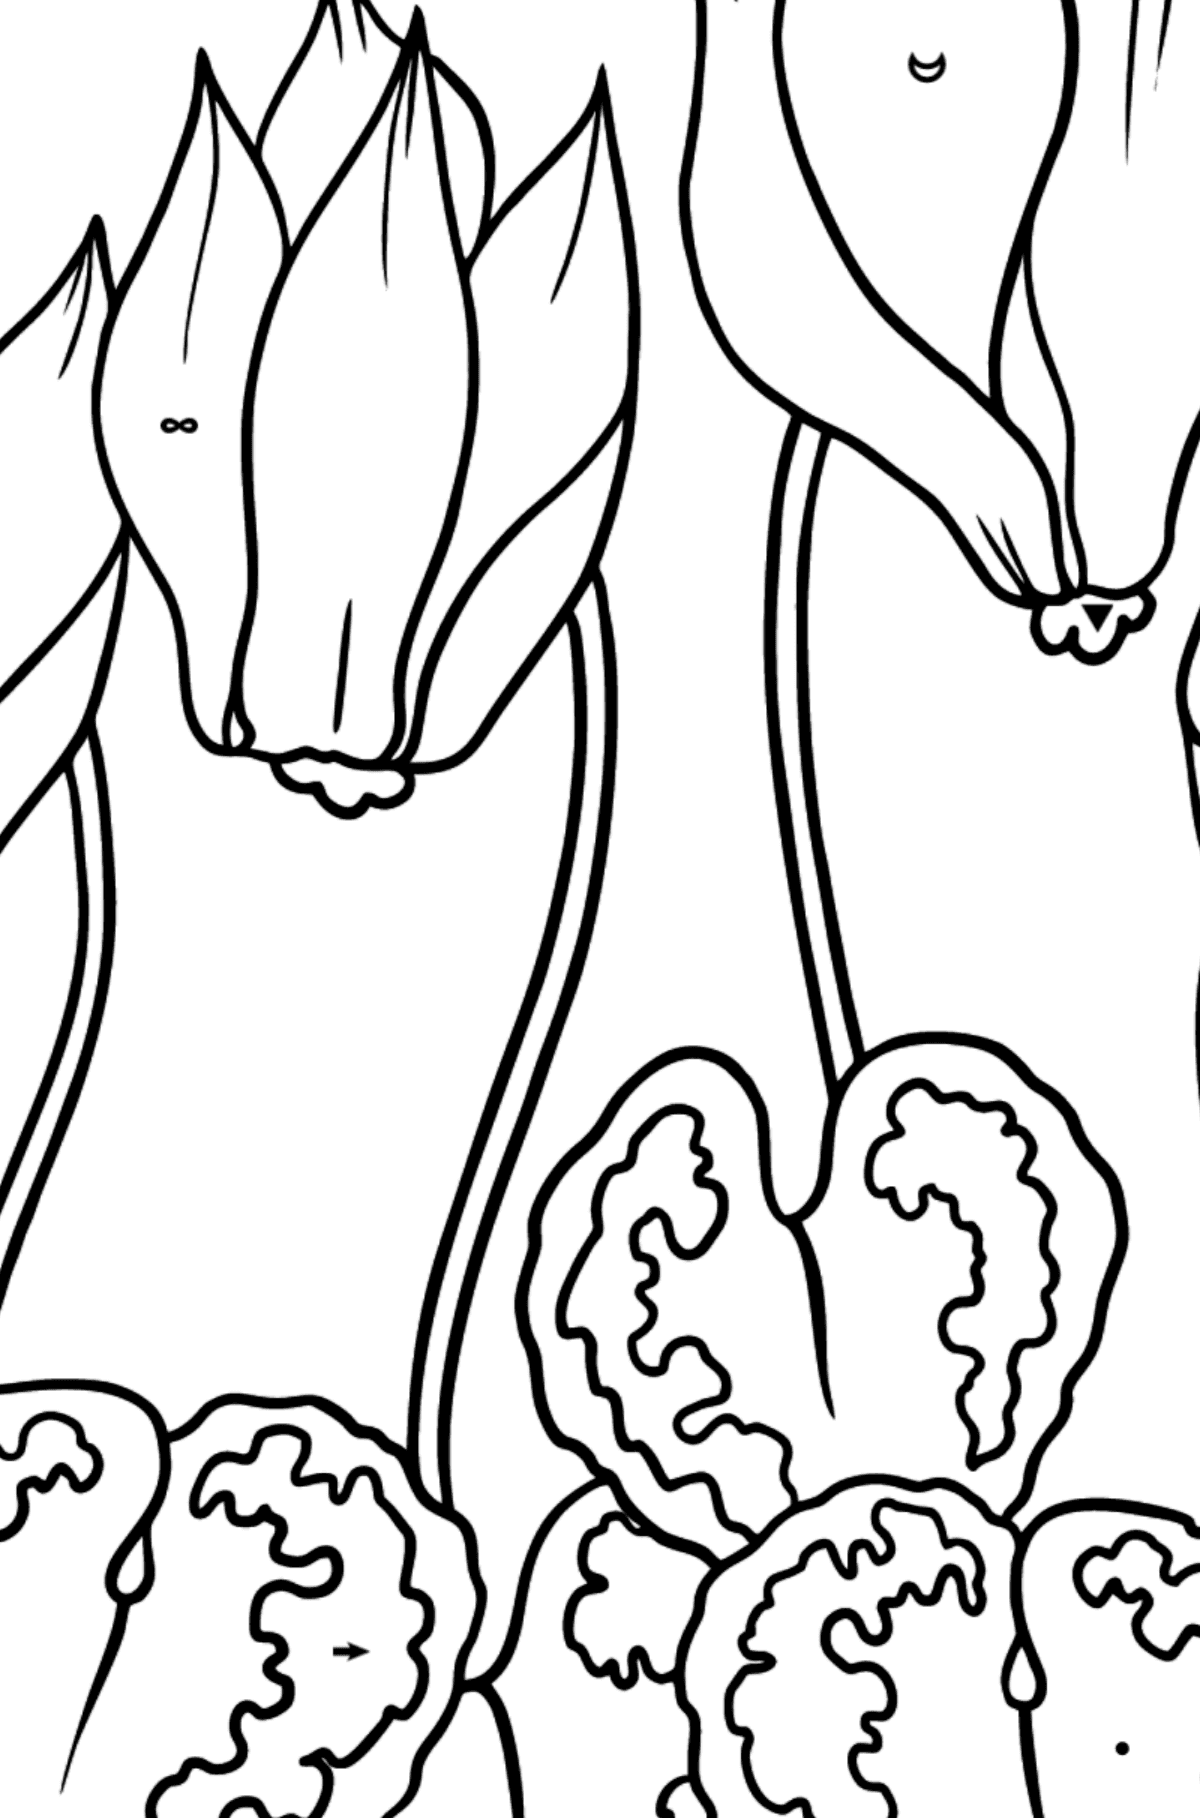 Coloring Page Red and Pink Cyclamen - Coloring by Symbols for Kids